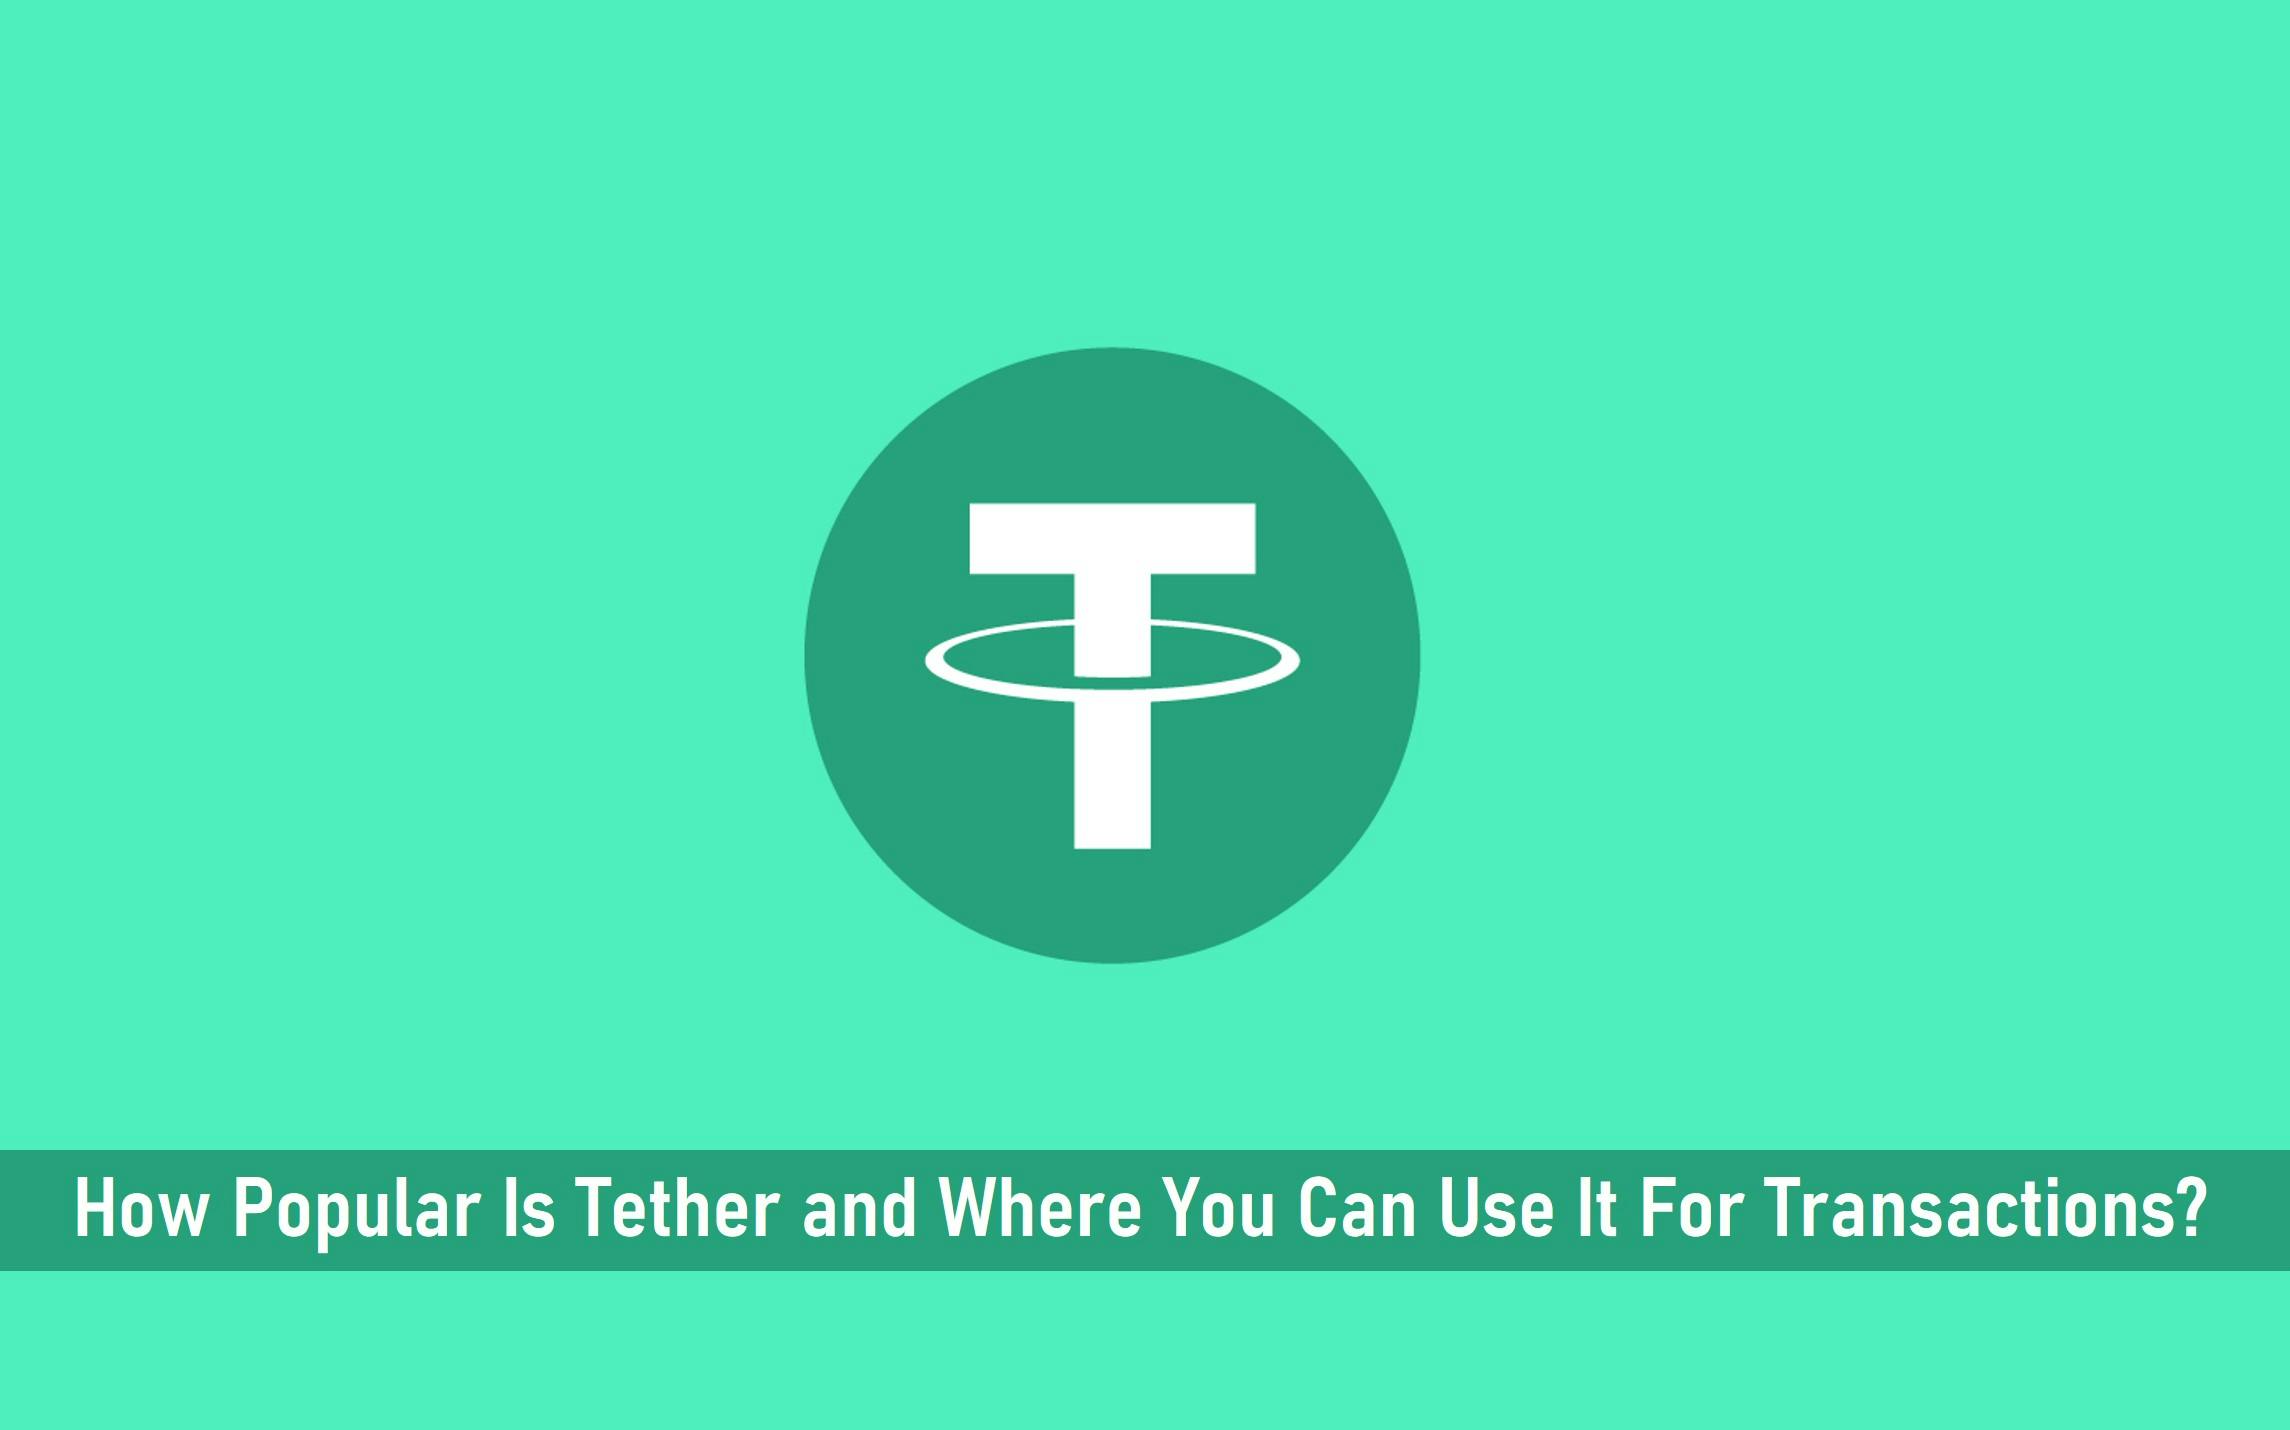 How Popular Is Tether and Where You Can Use It For Transactions?